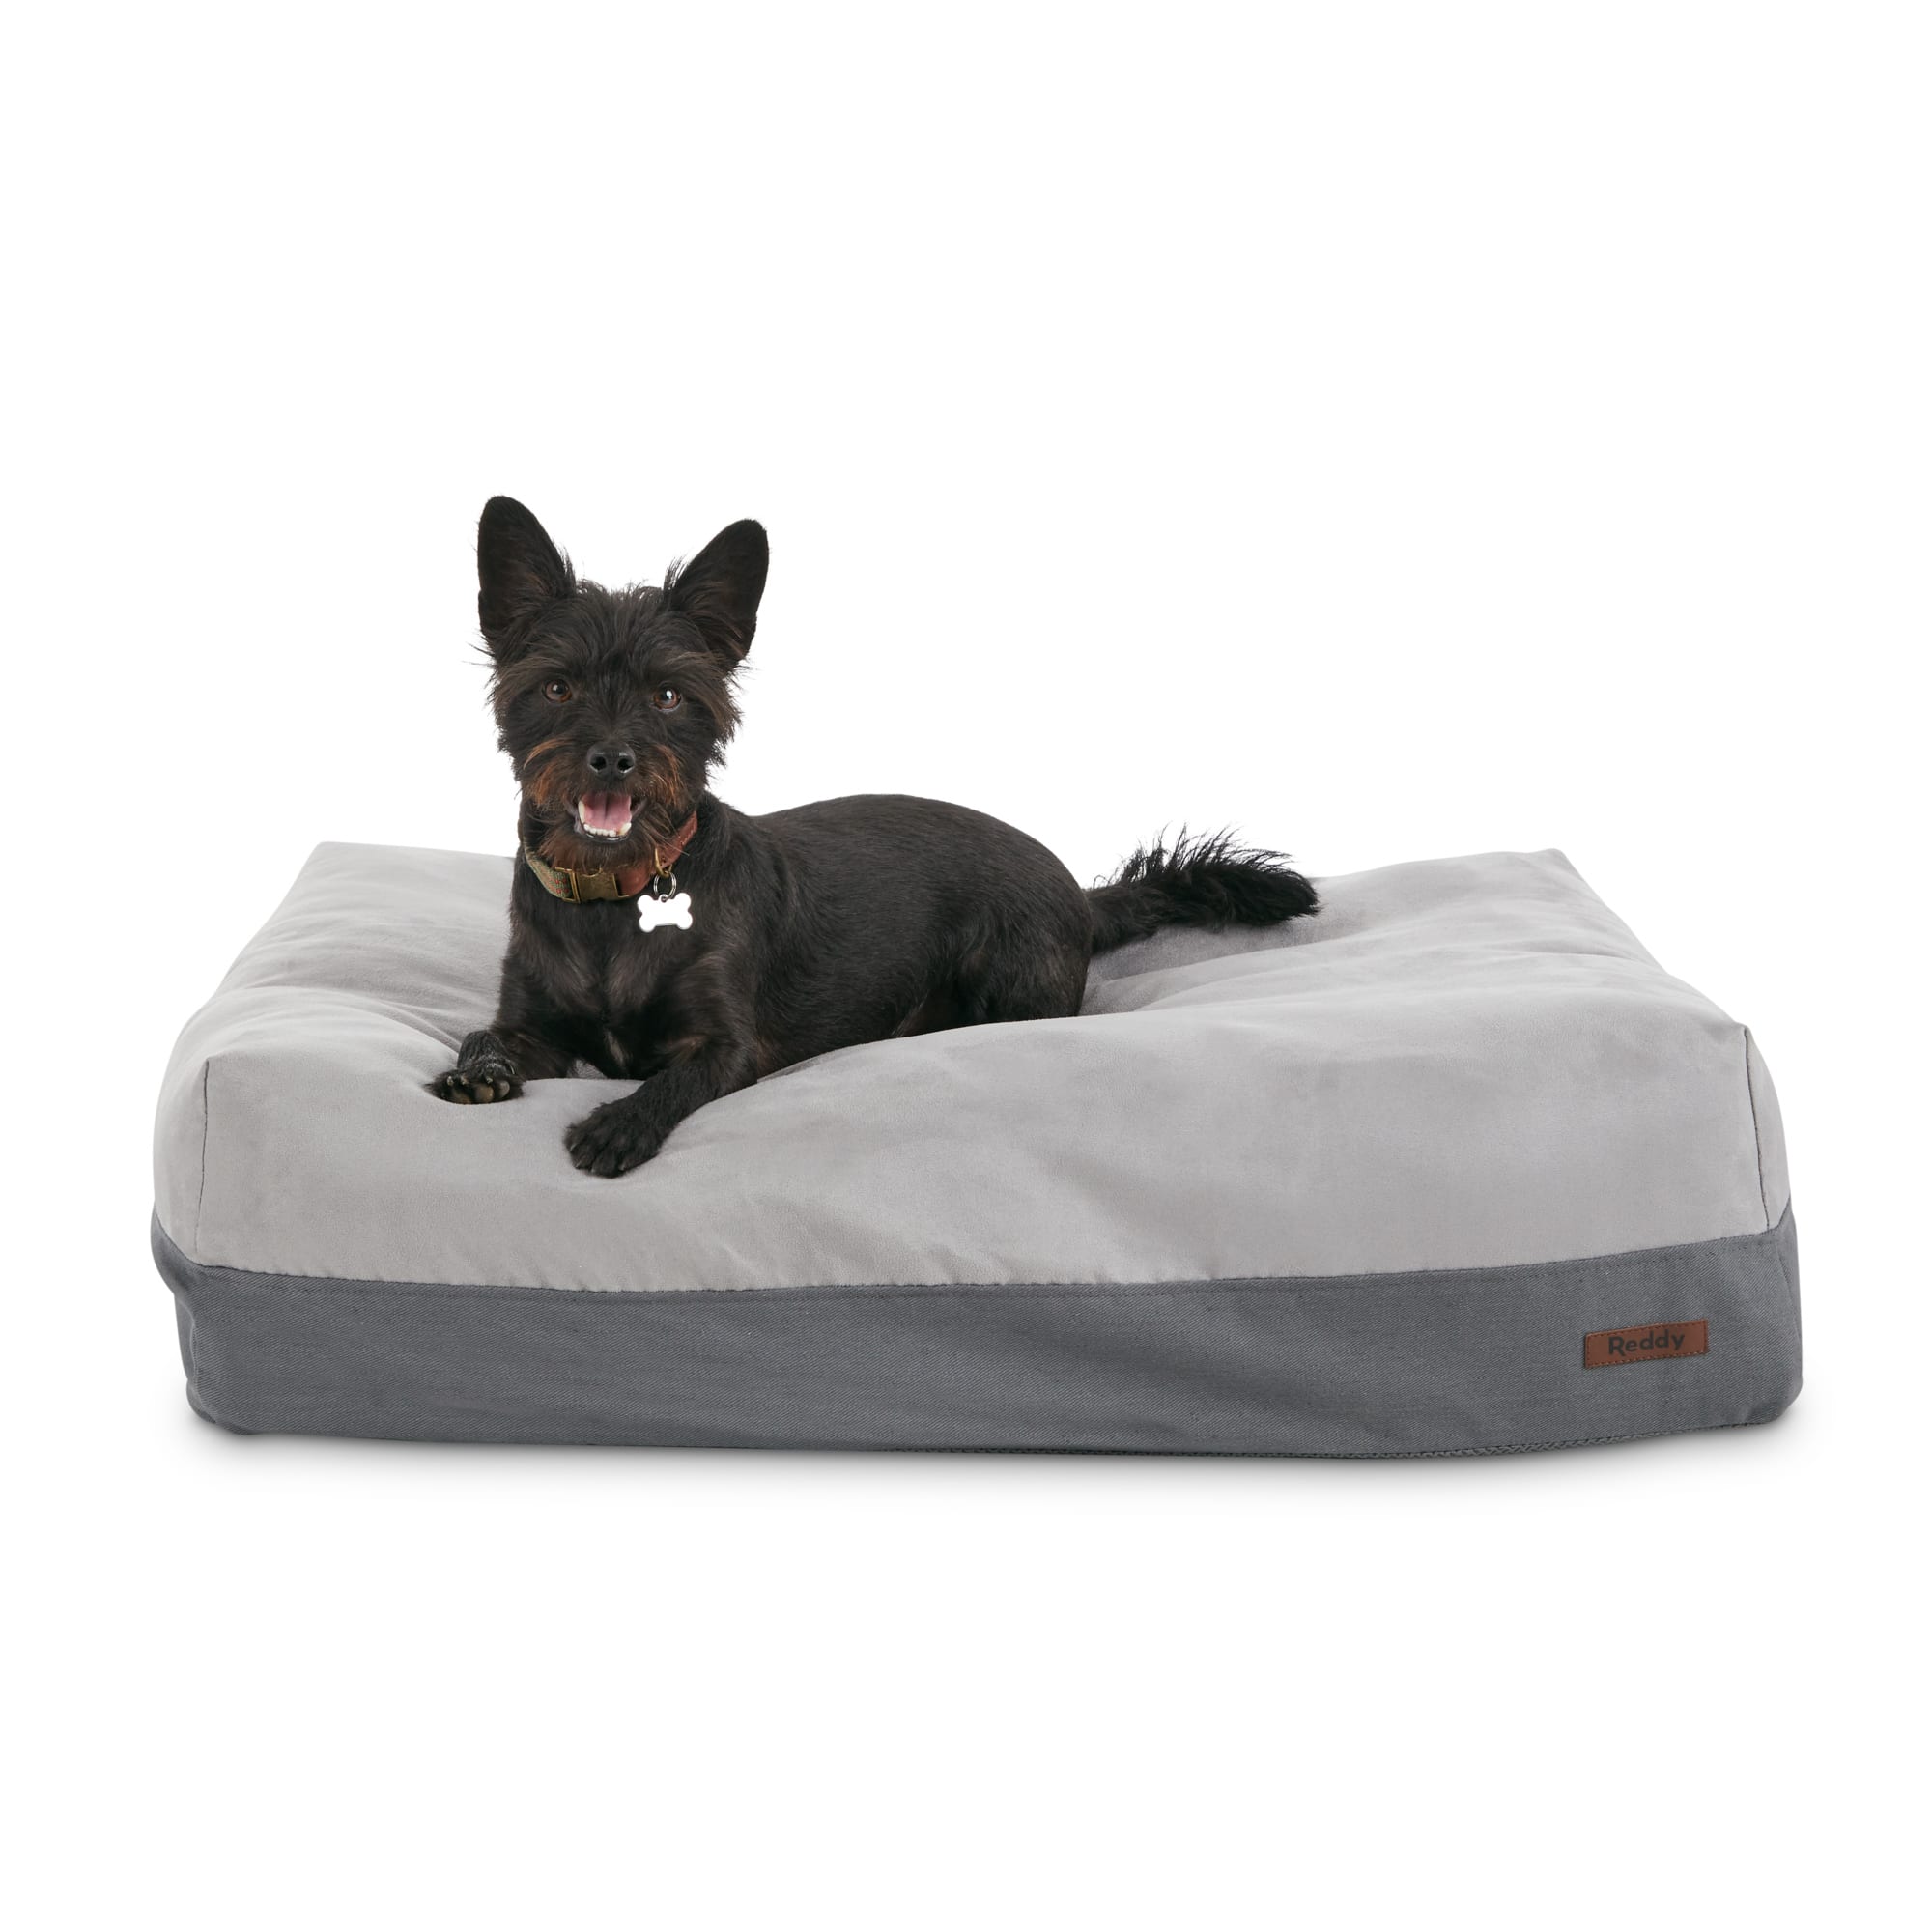 Reddy Lounger Orthopedic Black and Grey 